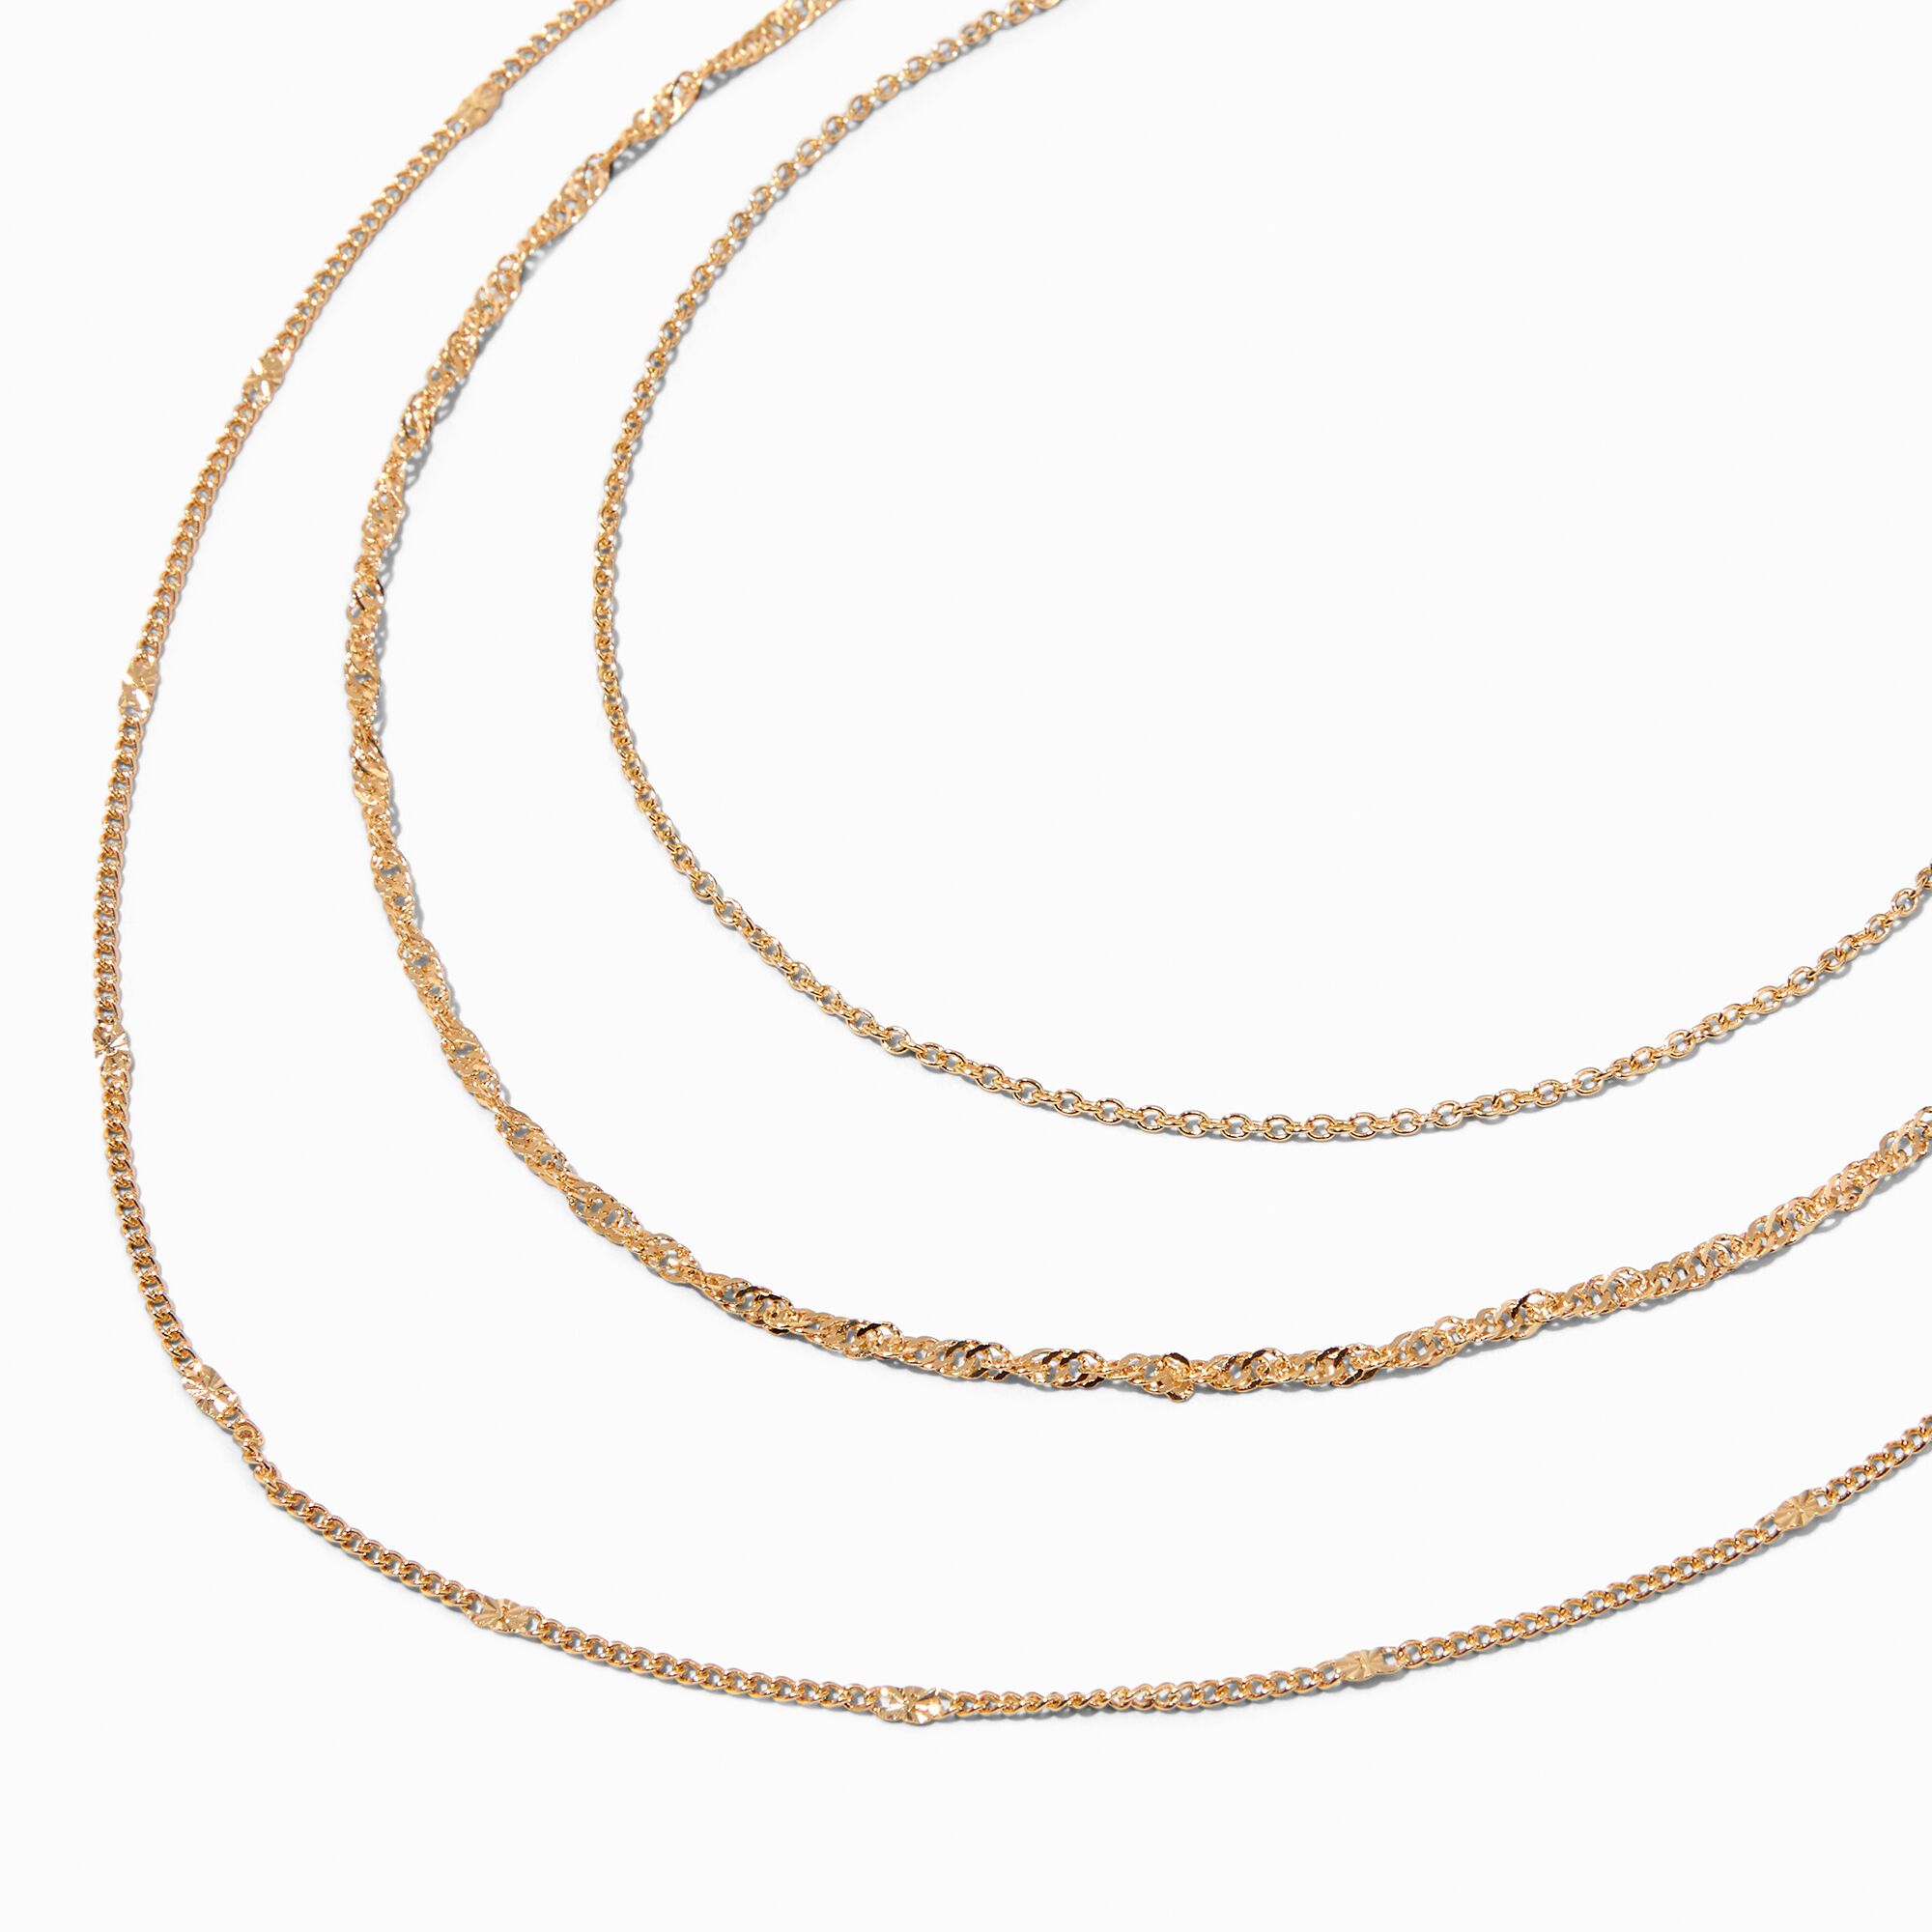 View Claires Recycled Jewelry Tone MultiStrand Woven Chain Necklace Gold information